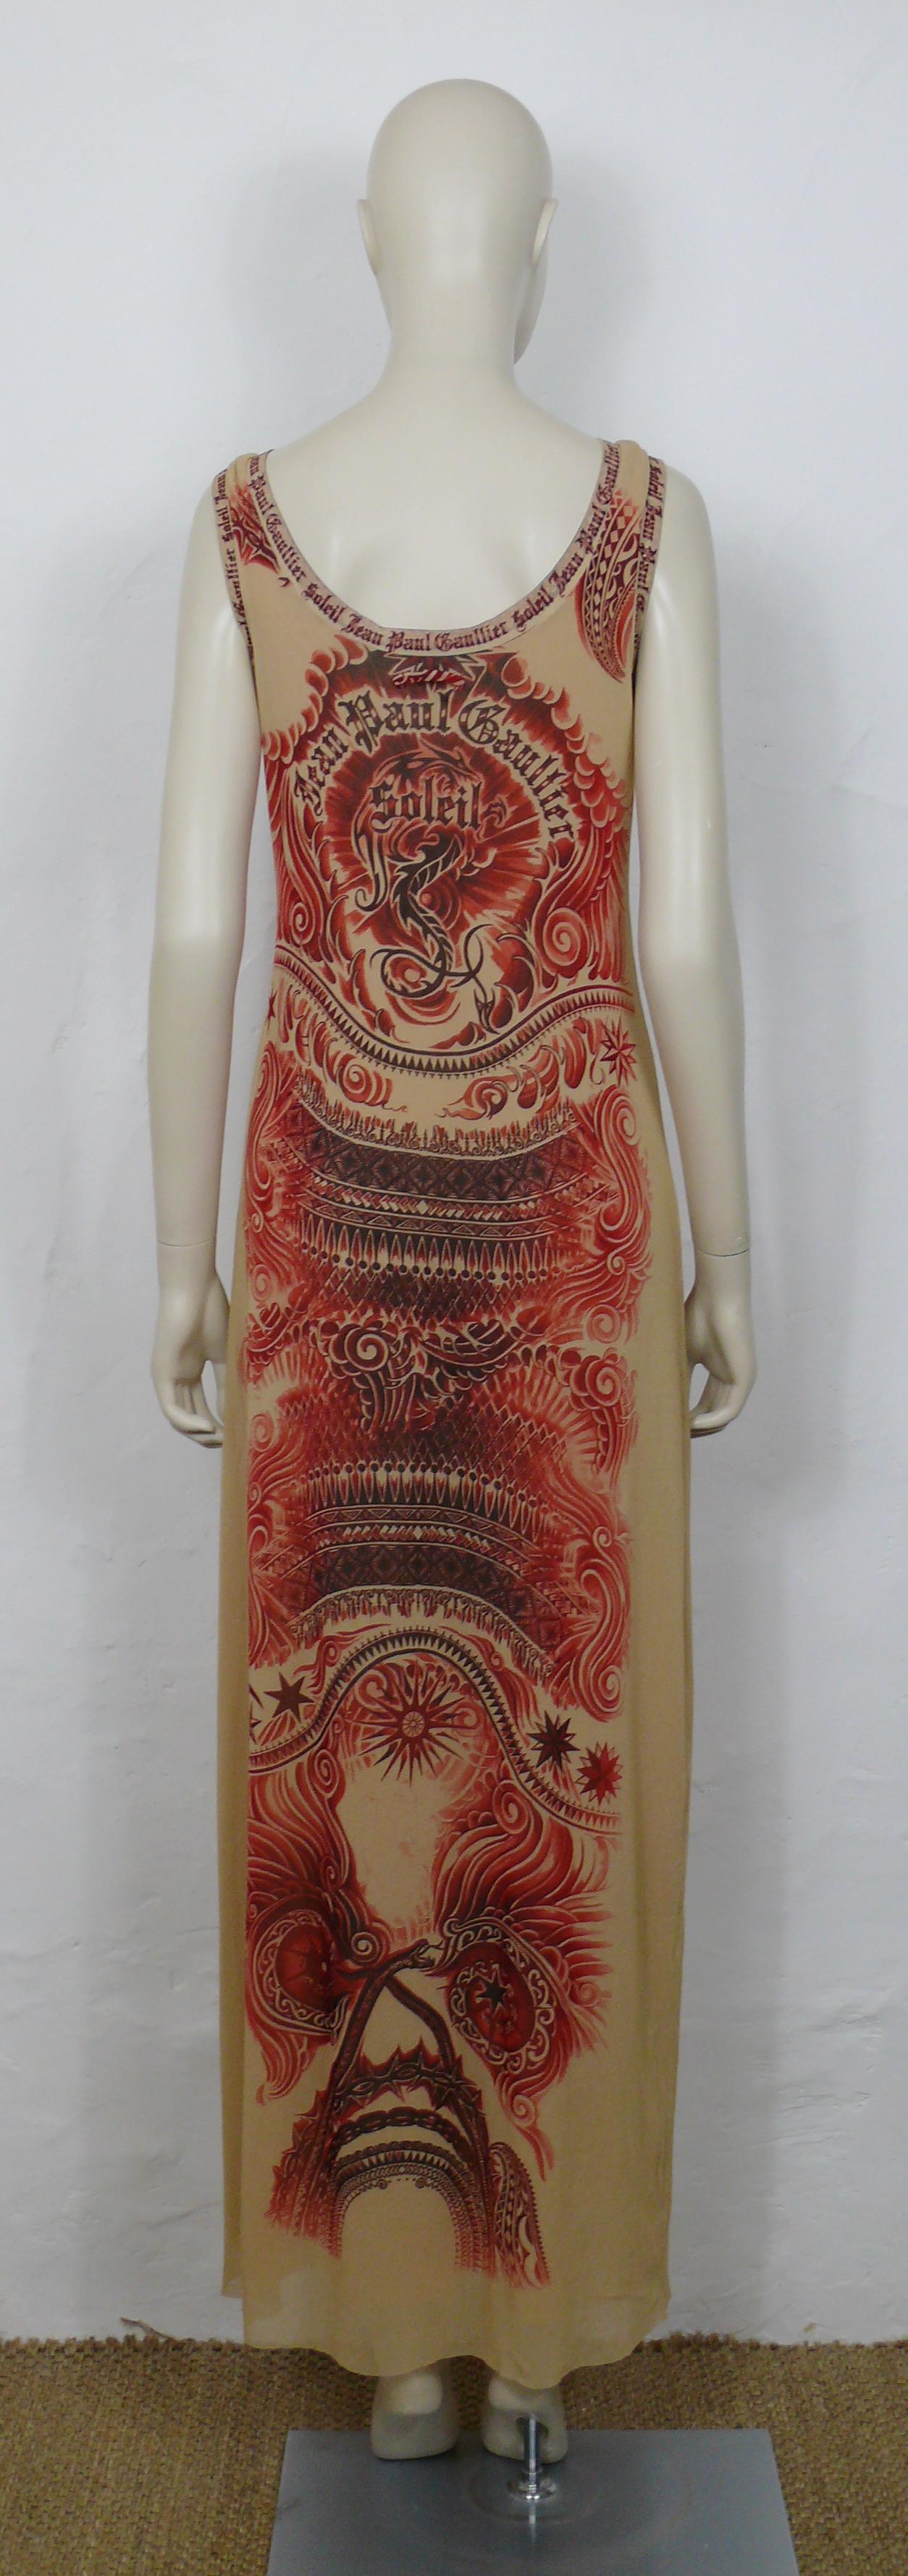 Jean Paul Gaultier Vintage Tattoo Print Semi Sheer Maxi Dress In Good Condition For Sale In Nice, FR